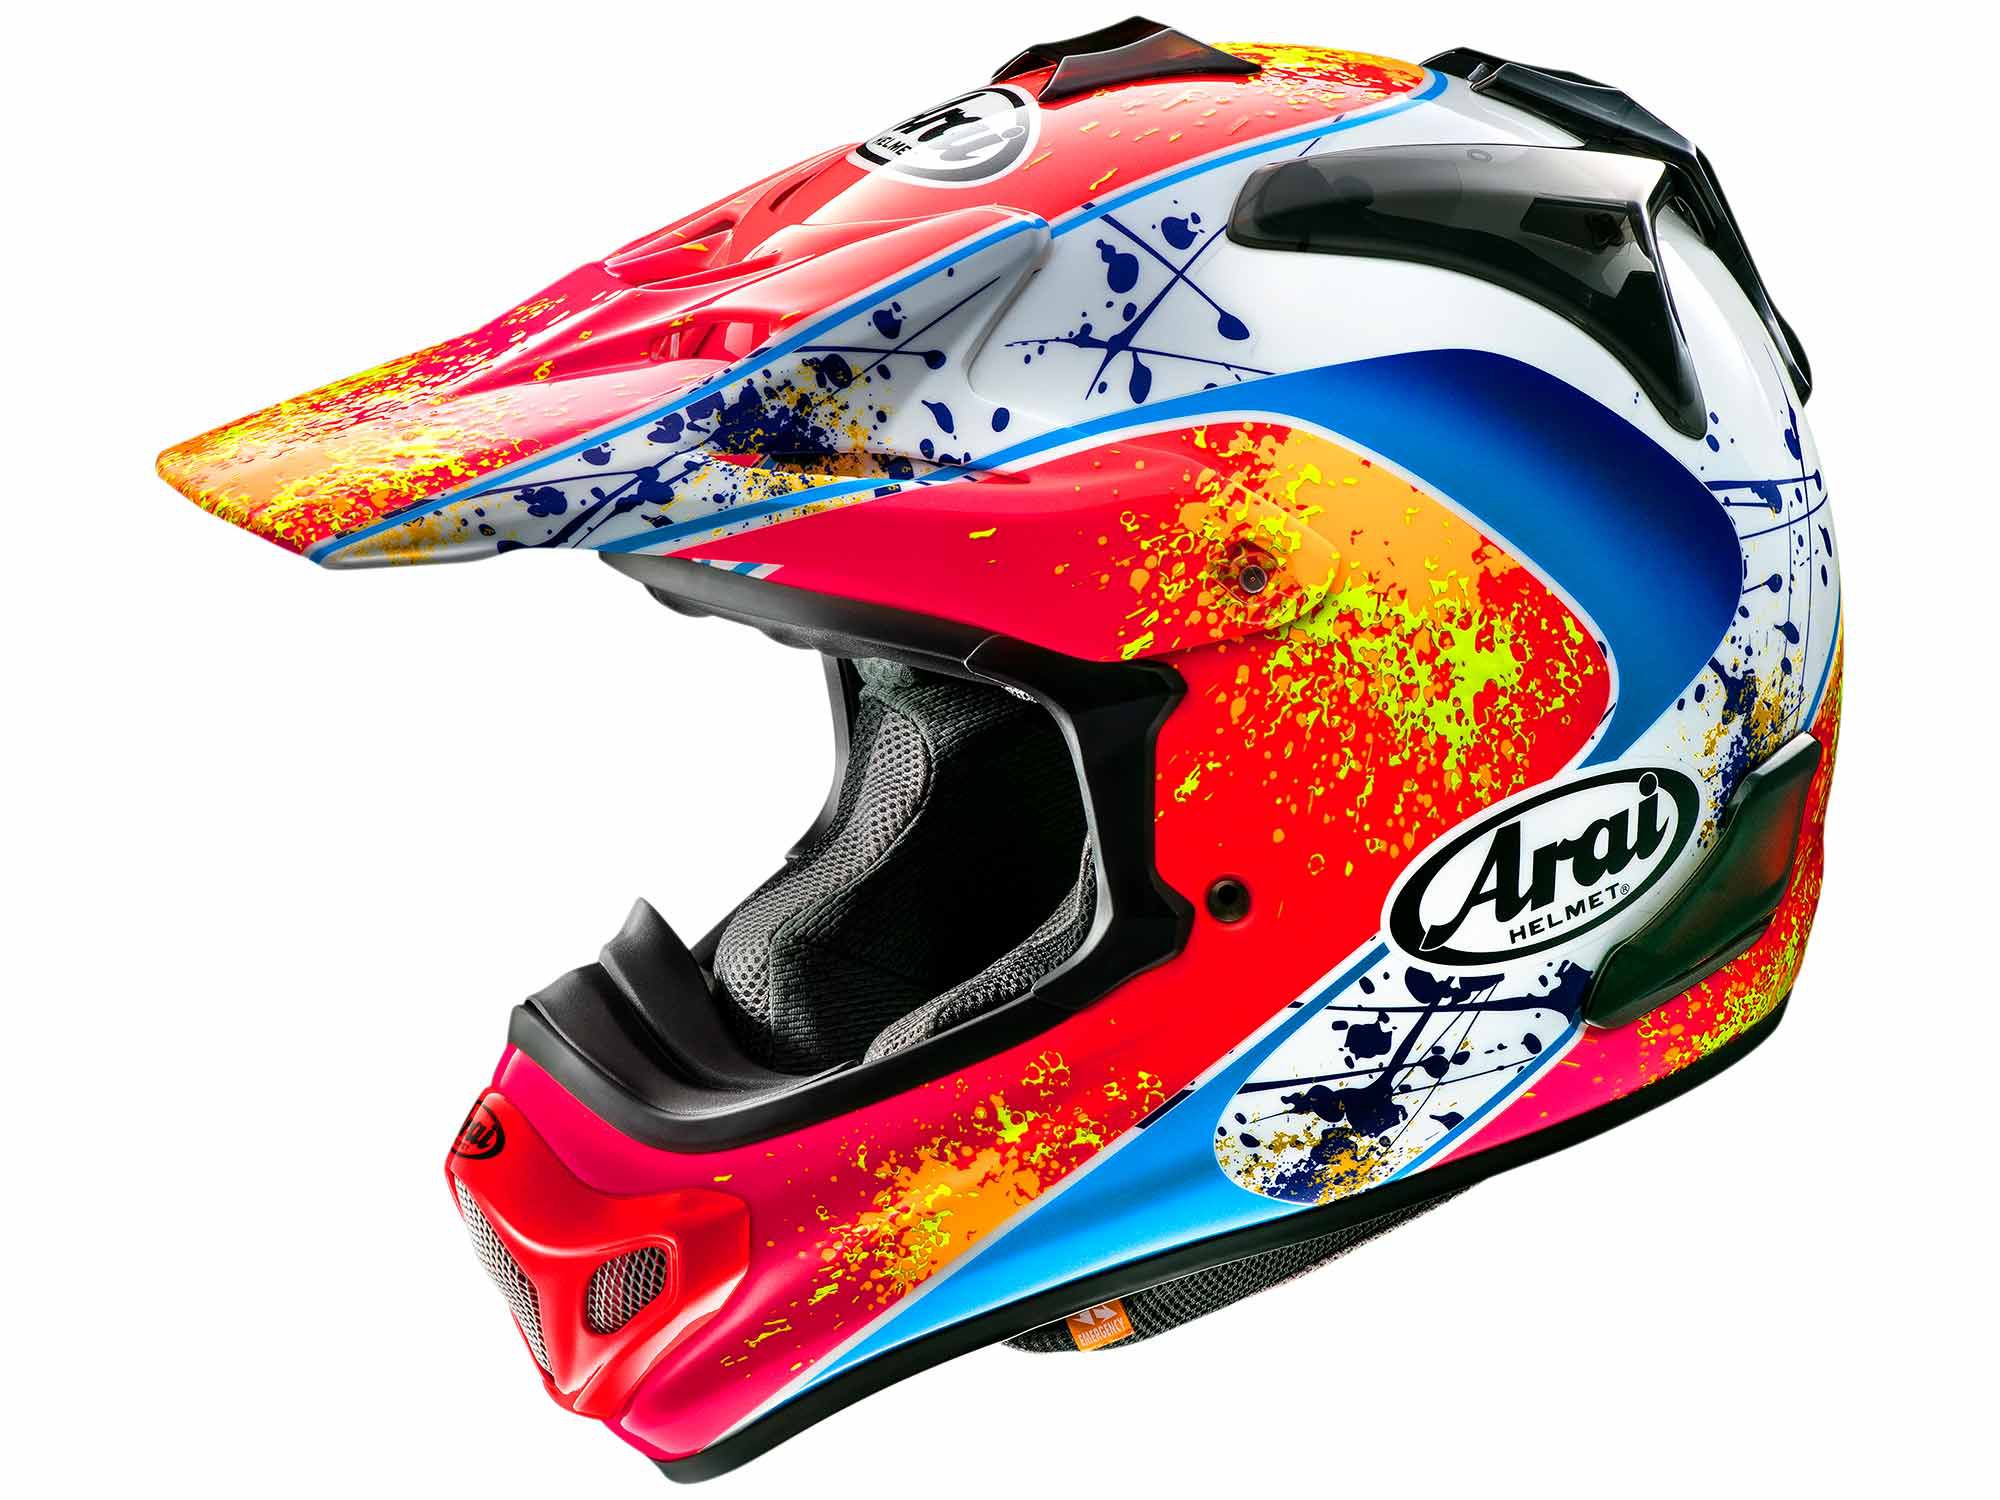 The Arai VX-Pro4 is a top-of-the-line off-road helmet your dad will love.